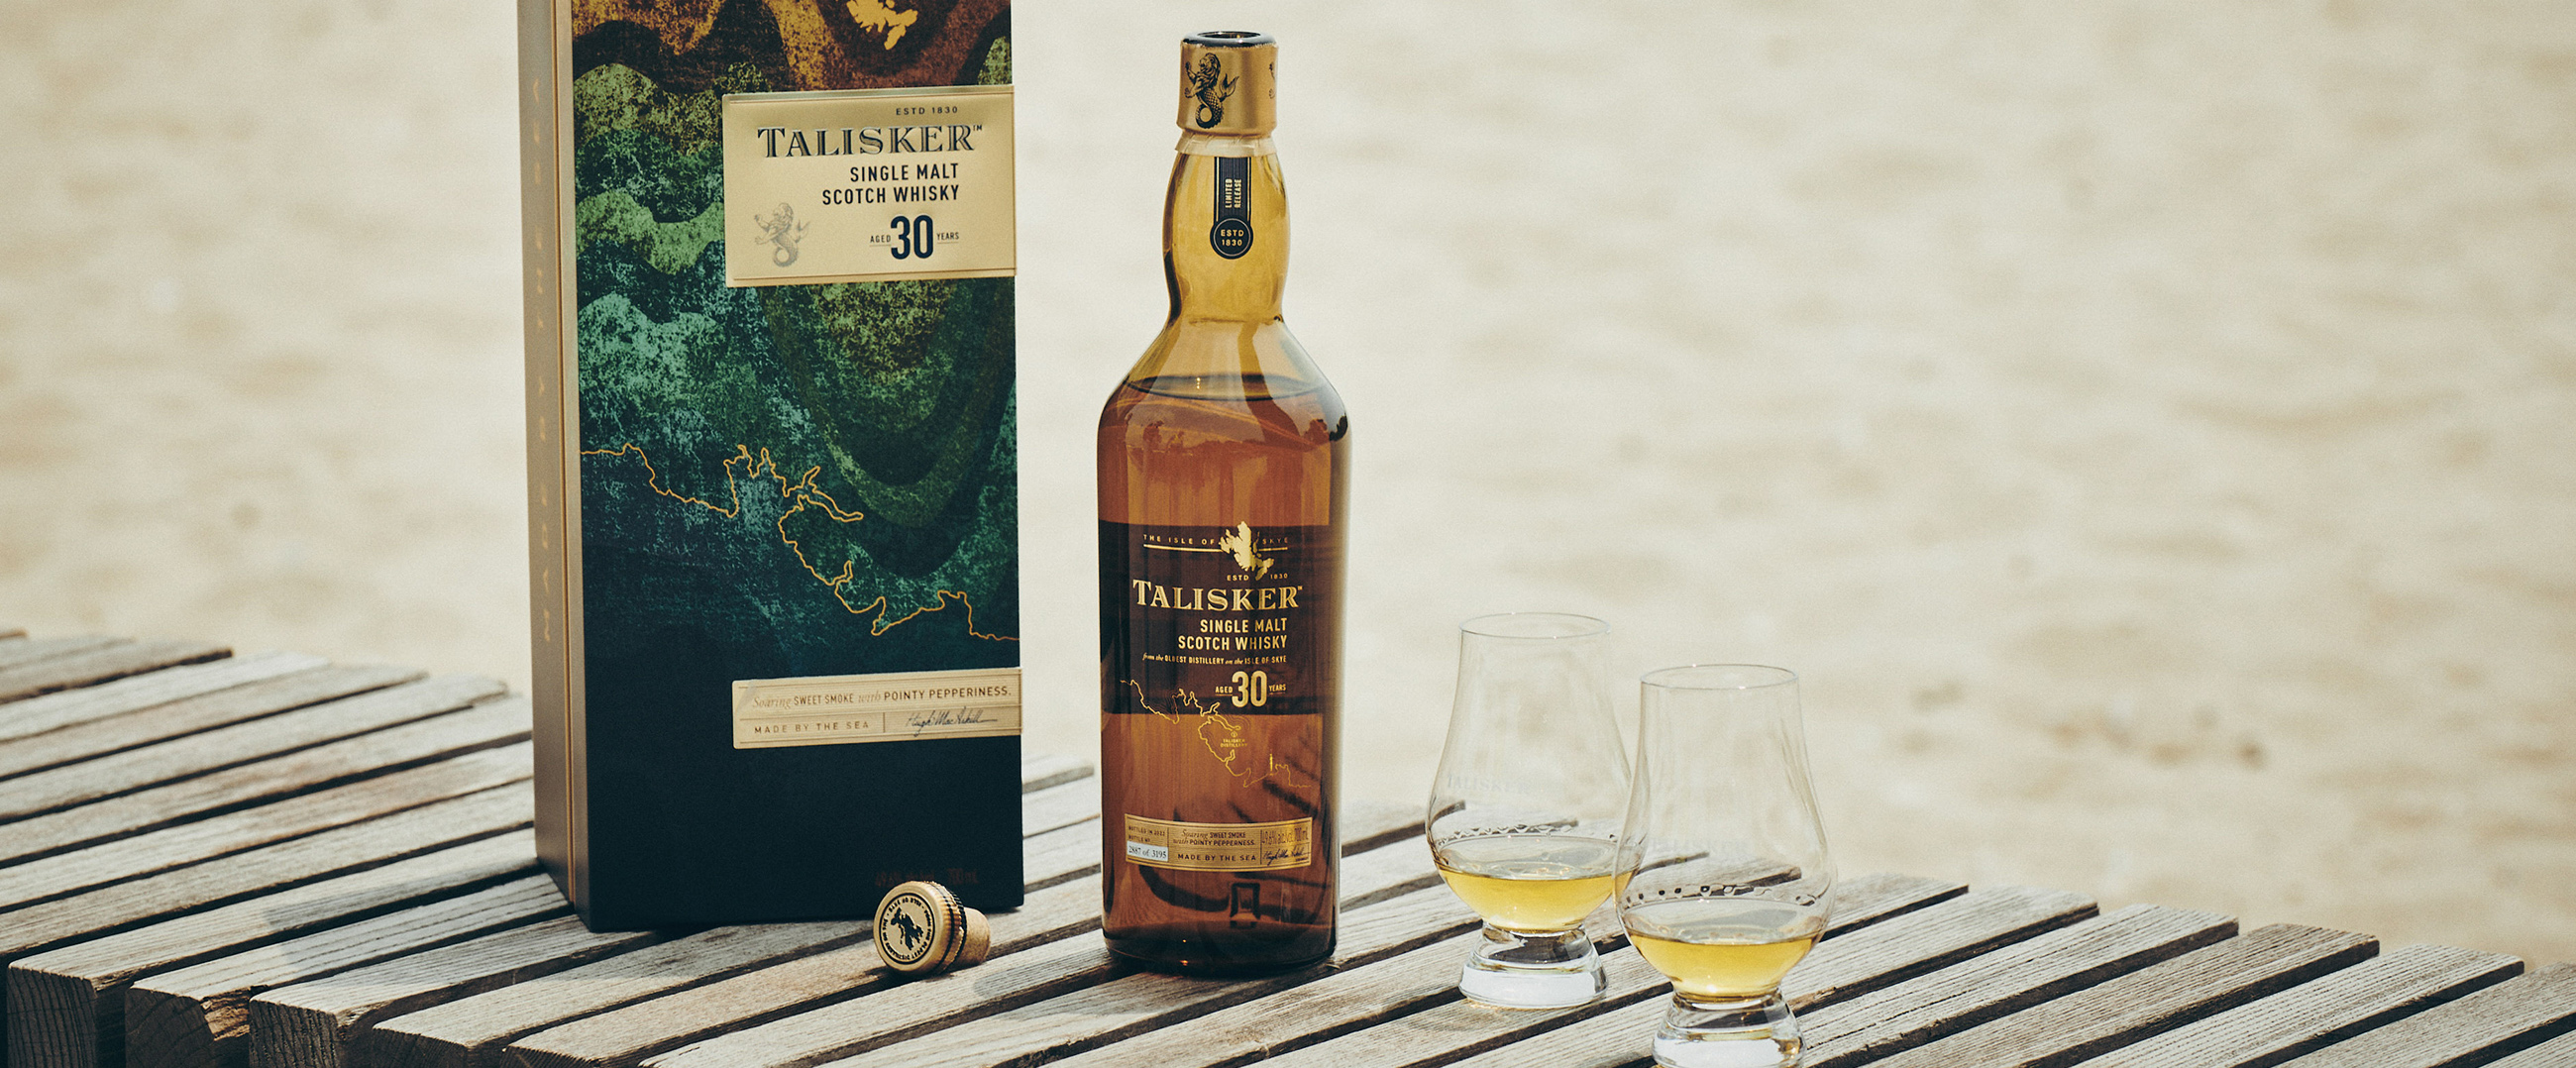 TALISKER DISTILLERY UNVEILS THE LATEST RELEASE OF ITS 30 YEAR OLD SINGLE MALT SCOTCH WHISKY